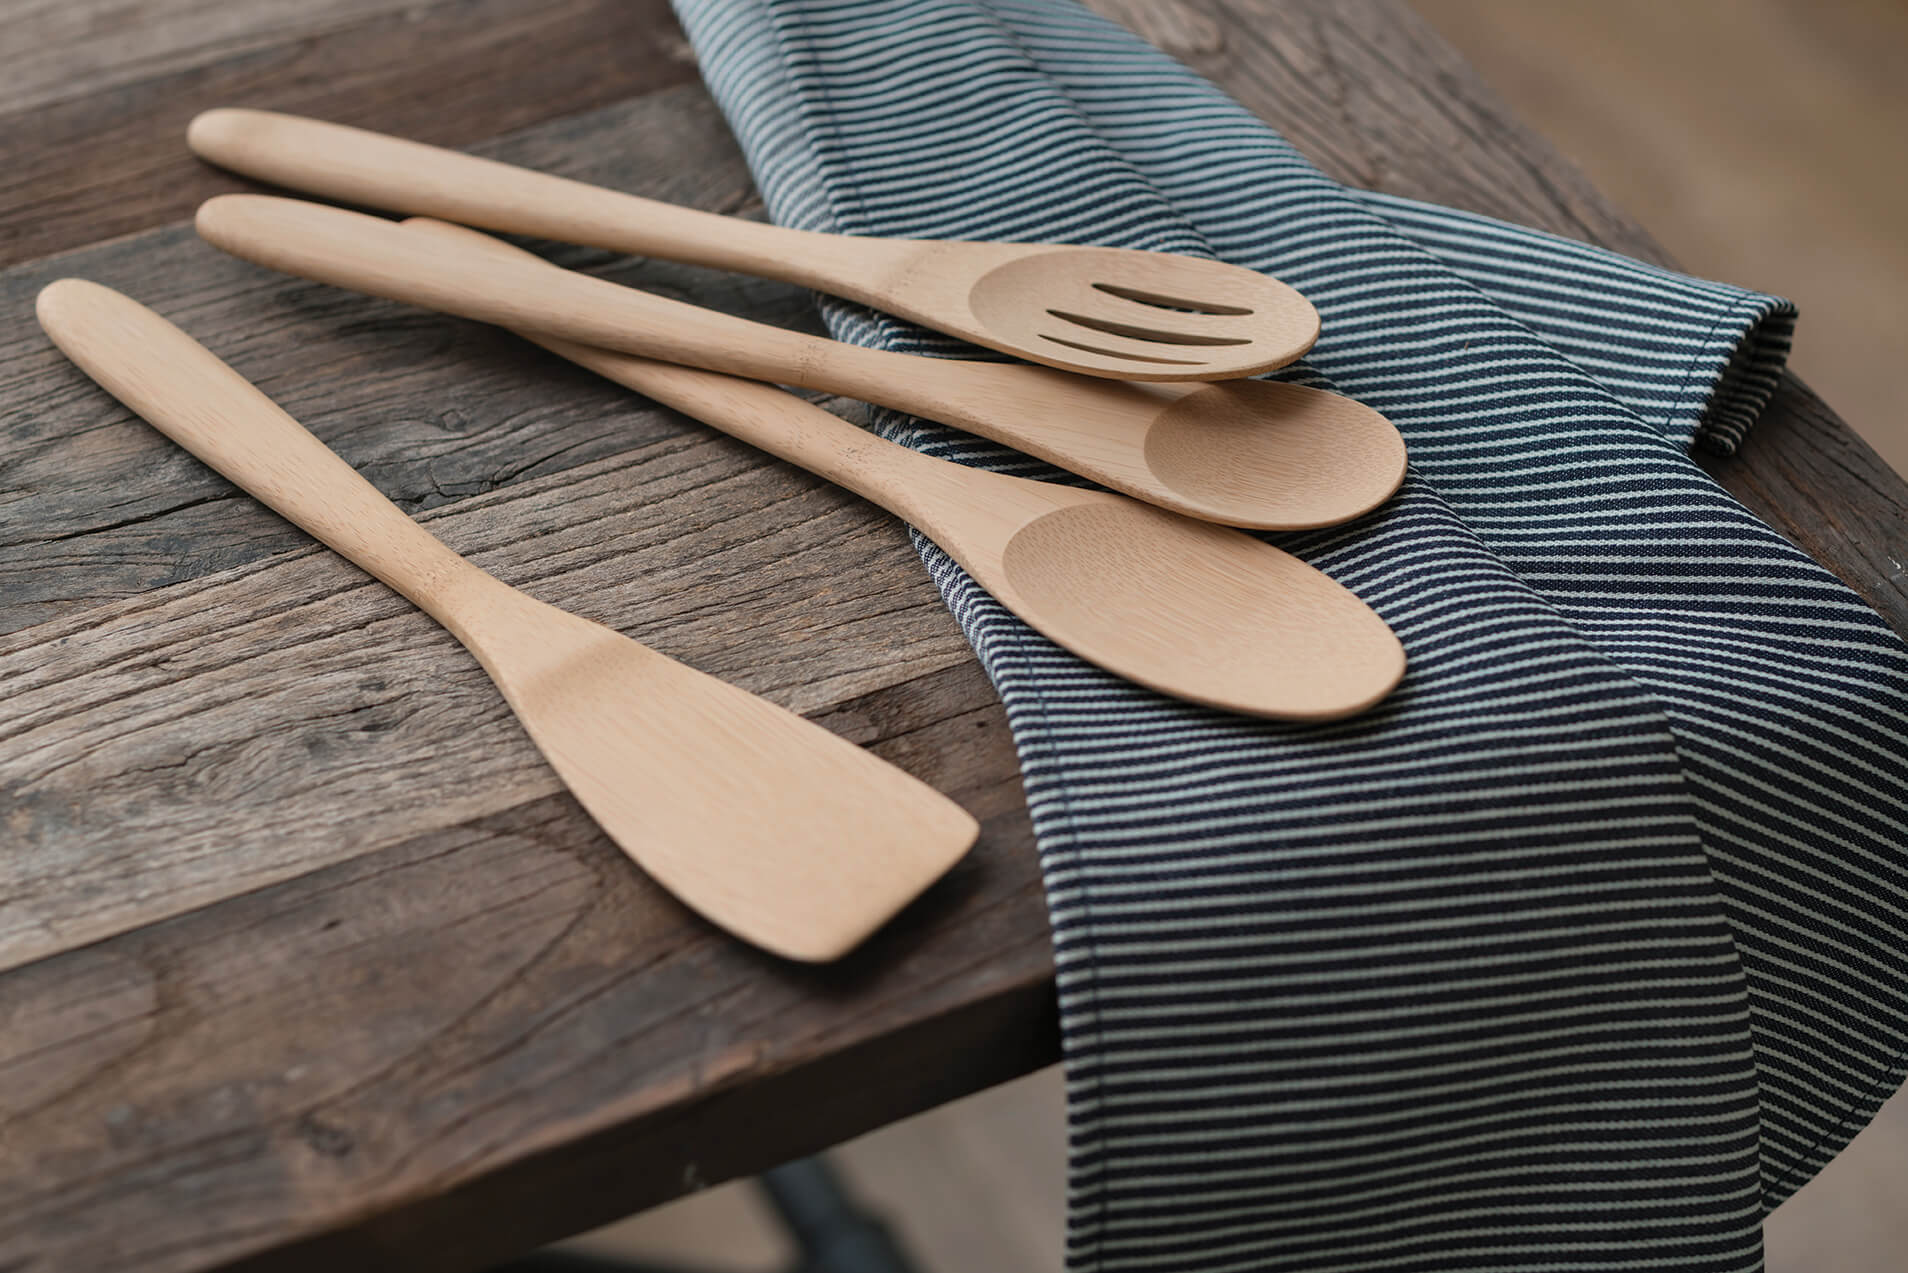 bambu® creates eco-friendly dinnerware & sustainable home goods. Specializing in certified organic products made from bamboo, cork, & hemp. Shop now.